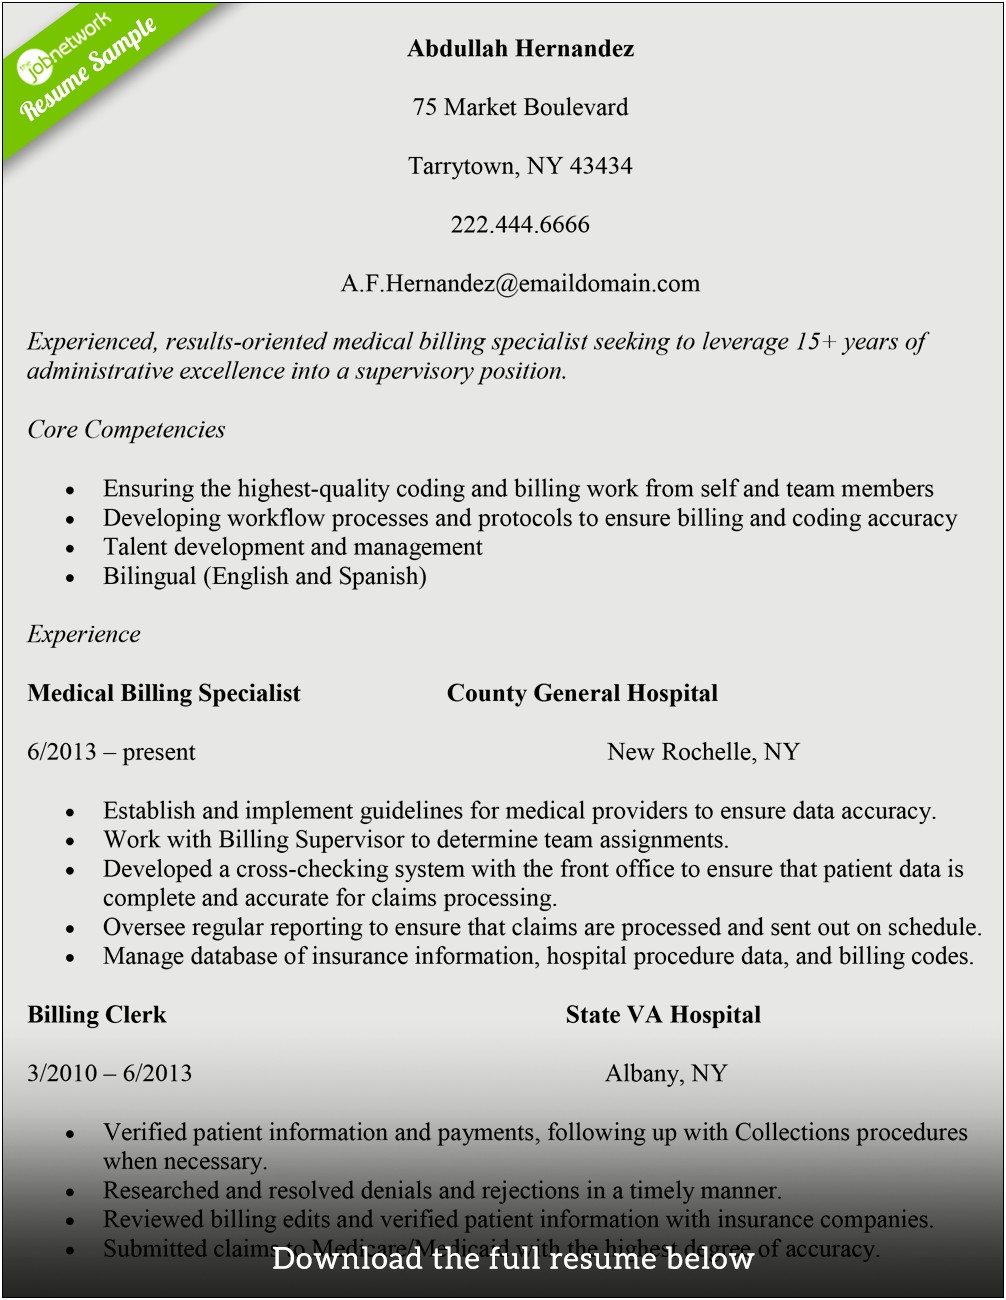 Medical Coding Resume Examples For Freshers